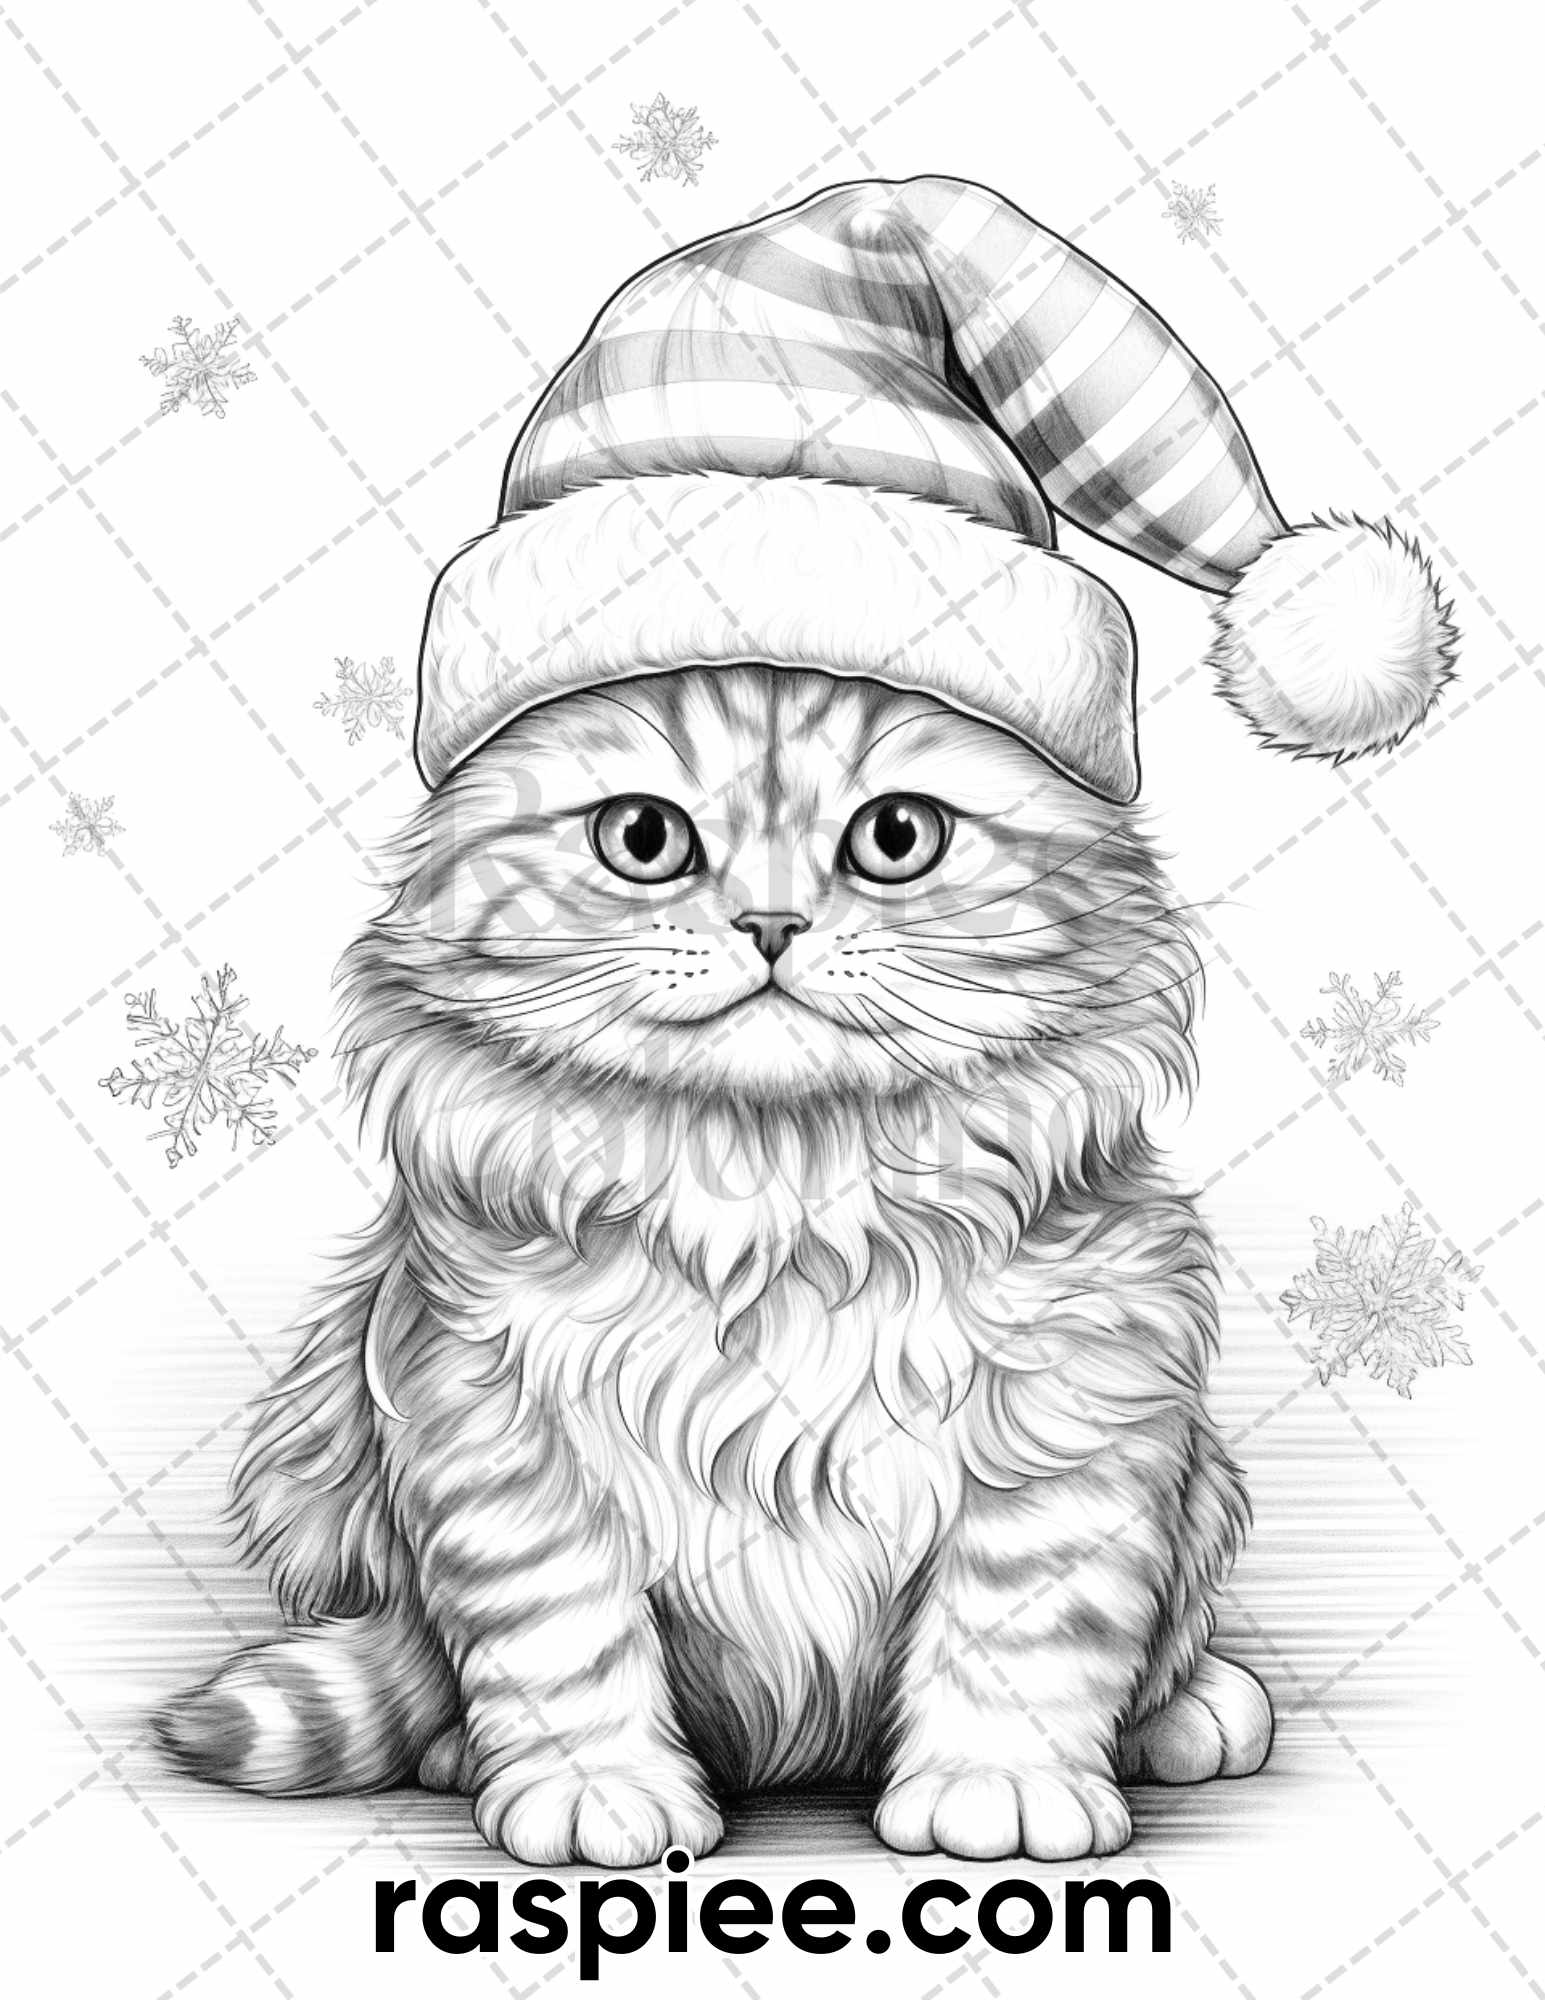 Christmas Cats Grayscale Coloring Page, Adult Coloring Book Cat Illustration, Xmas Cat Coloring Sheet for Download, Winter Cat Coloring Pages, Winter Animal Coloring Pages, Christmas Coloring Pages, Xmas Coloring Pages, Christmas Coloring Book Printable, Holiday Coloring Pages, Pet Coloring Pages, Kitten Coloring Pages